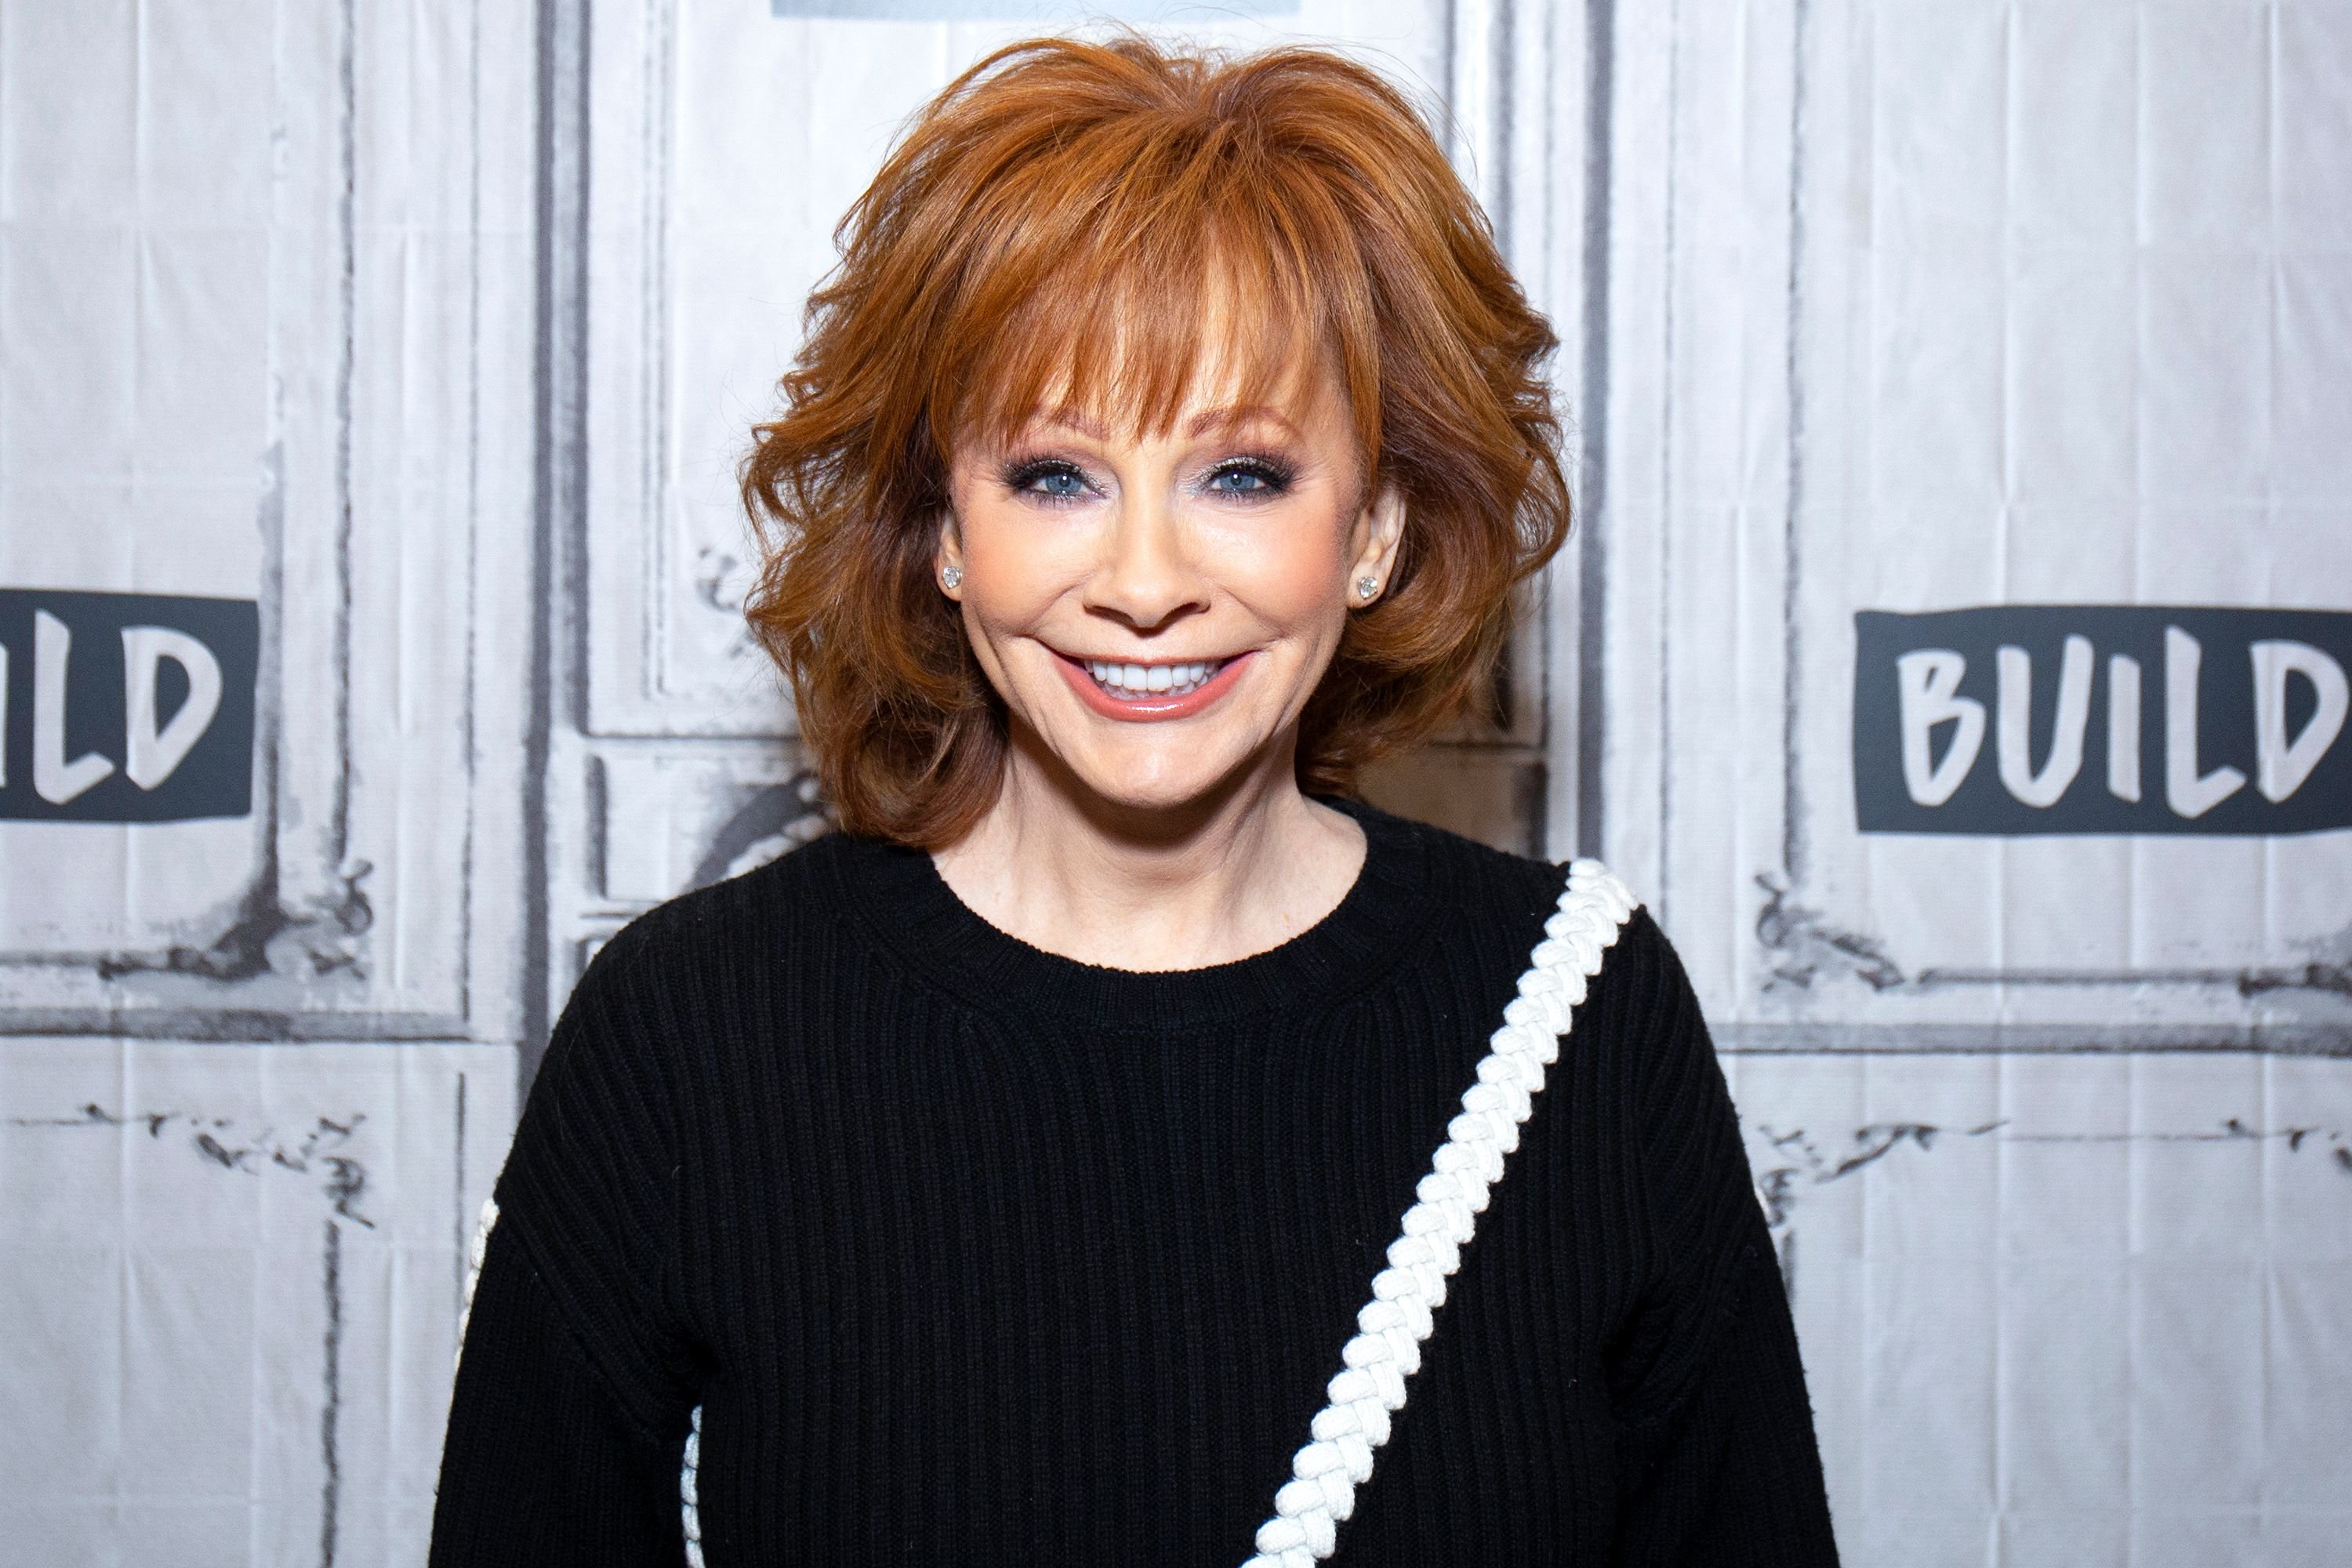 Reba McEntire at Build Studio on February 20, 2019 | Photo: Getty Images